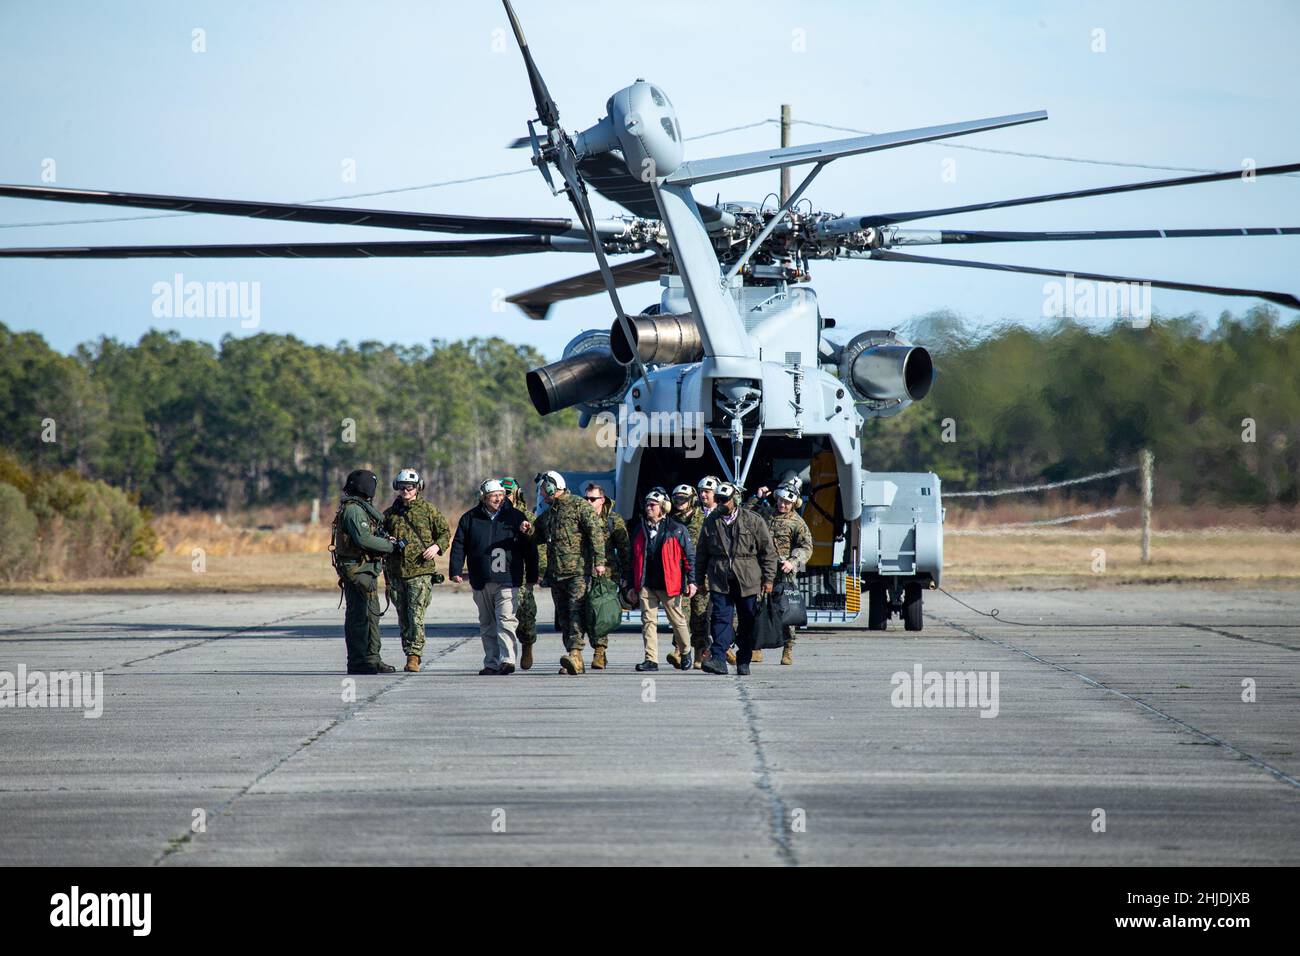 Secretary of the Navy Carlos Del Toro exits a CH-53K Super Stallion at Marine Corps Auxiliary Landing Field (MCALF) Bogue, North Carolina, Jan. 27, 2022. While at MCALF Bogue, Del Toro met with II Marine Expeditionary Force leadership and observed an Expeditionary Advanced Based Operations demonstration in an effort to become acquainted with II MEF capabilities. (U.S. Marine Corps photo by Lance Cpl. Jacob Bertram) Stock Photo